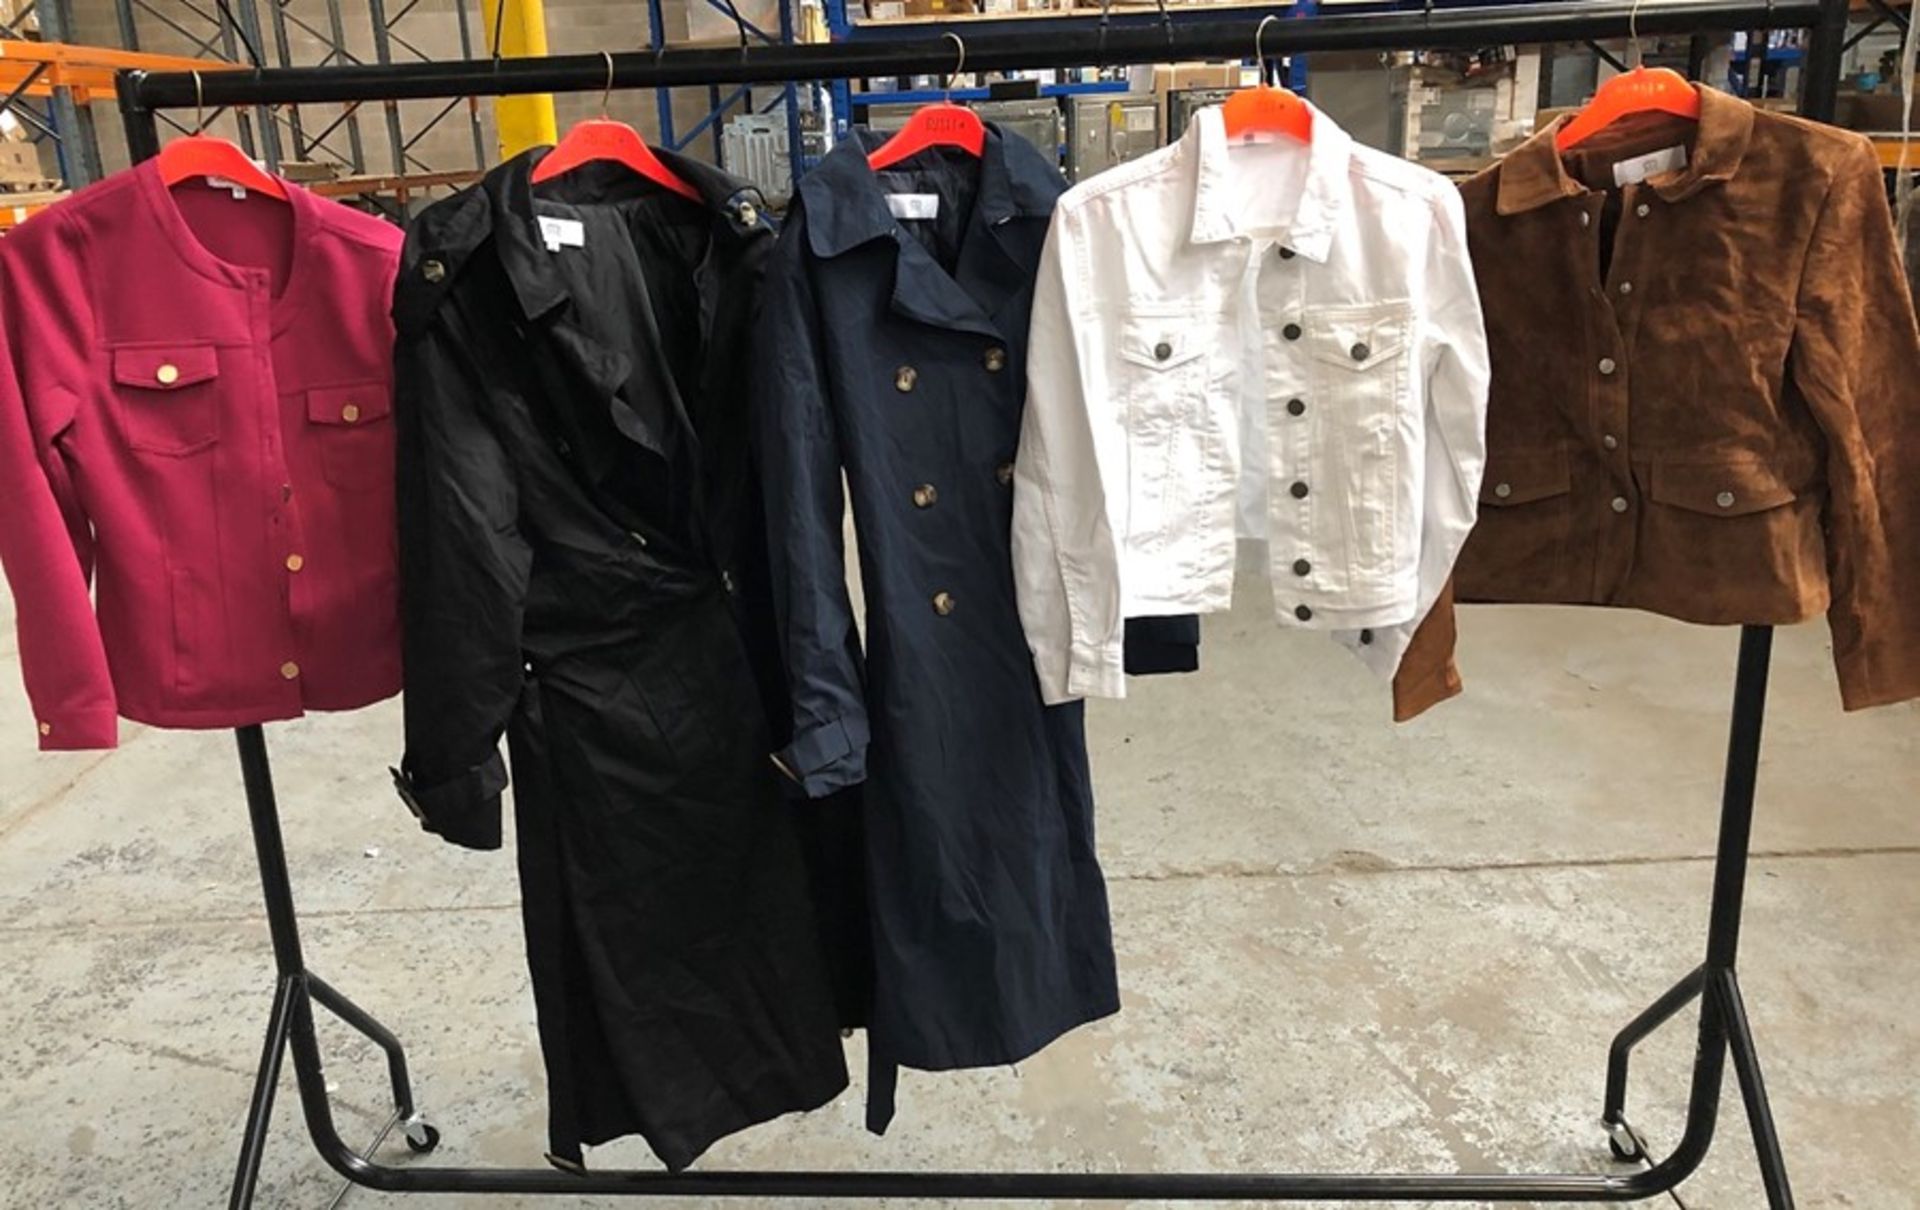 1 LOT TO CONTAIN 5 ASSORTED DESIGNER WOMENS JACKETS / SIZES AND CONDITIONS VARY (5 ITEMS SELECTED IN